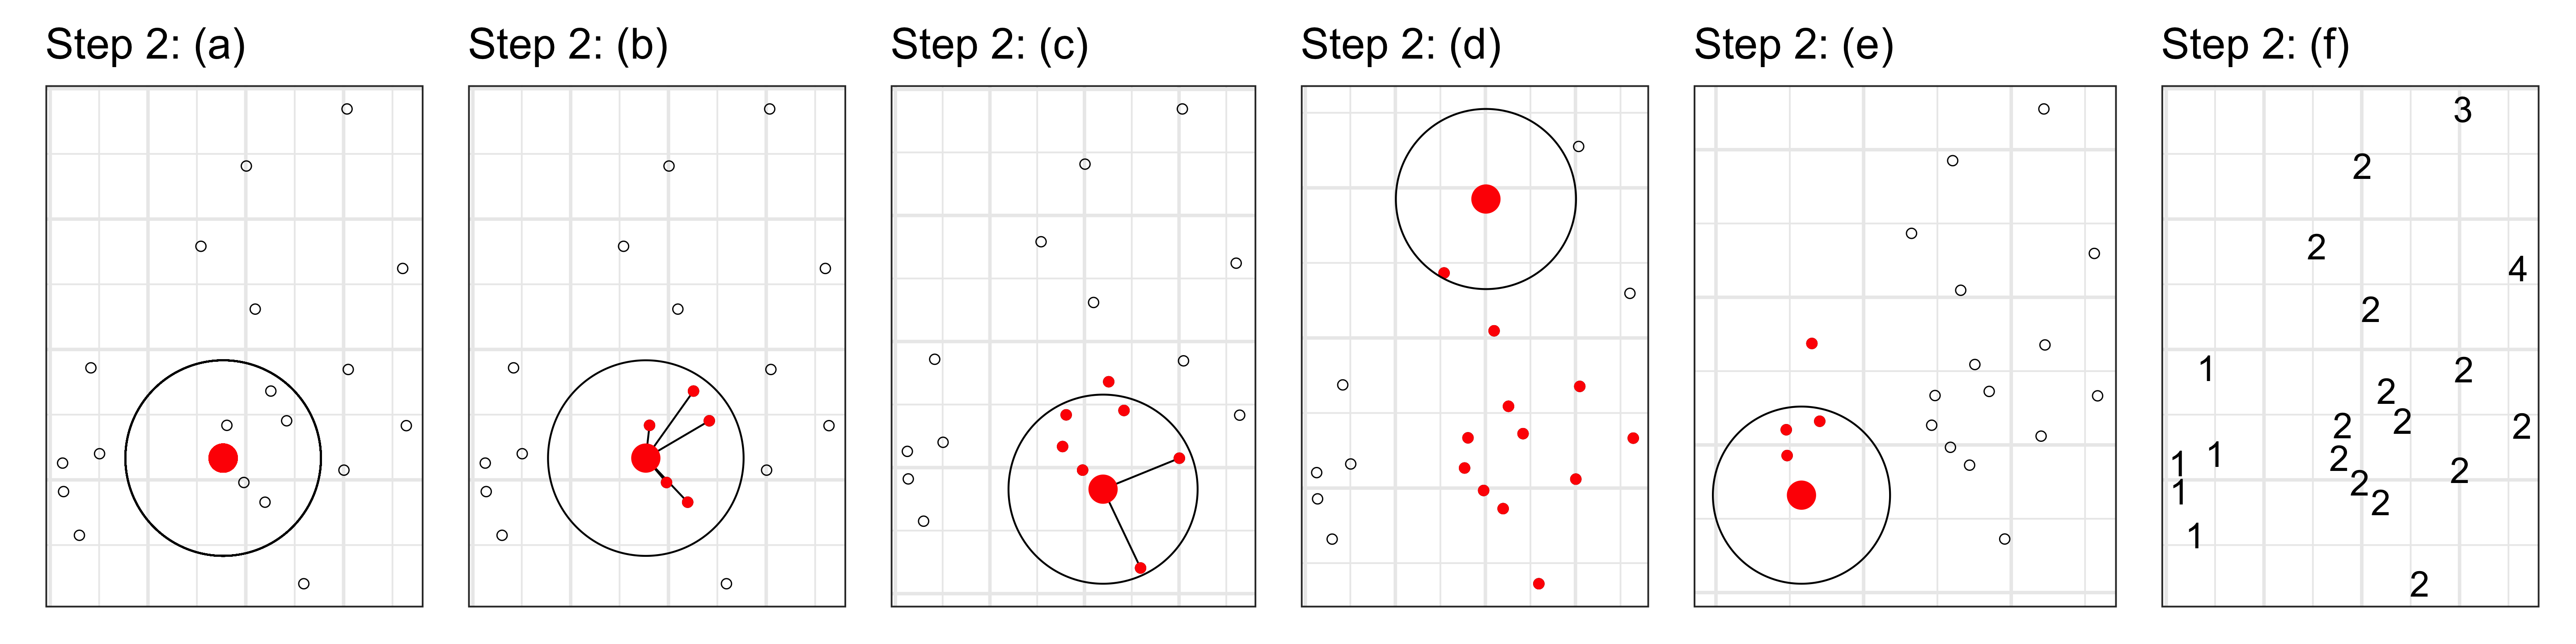 Illustration showing Step 2 of the clustering algorithm on a sample of 20 hotspots in one time window $\boldsymbol{S}_t$. Initially (a), a hotspot is selected randomly ($\boldsymbol{P}$) in order to seed a cluster. The circle indicates the maximum neighborhood distance ($adjDist$). Nearby hotspots as shown in red are clustered with $\boldsymbol{P}$ (b) to initialize list $\boldsymbol{L}$. The neighborhood is moved following every point in that collected list $\boldsymbol{L}$ and new observations are added (c), until there no more points that can be grouped (d). Then a new hotspot is selected external to the existing cluster, and the process is repeated (e). At the end, all the hotspots will be clustered (f).